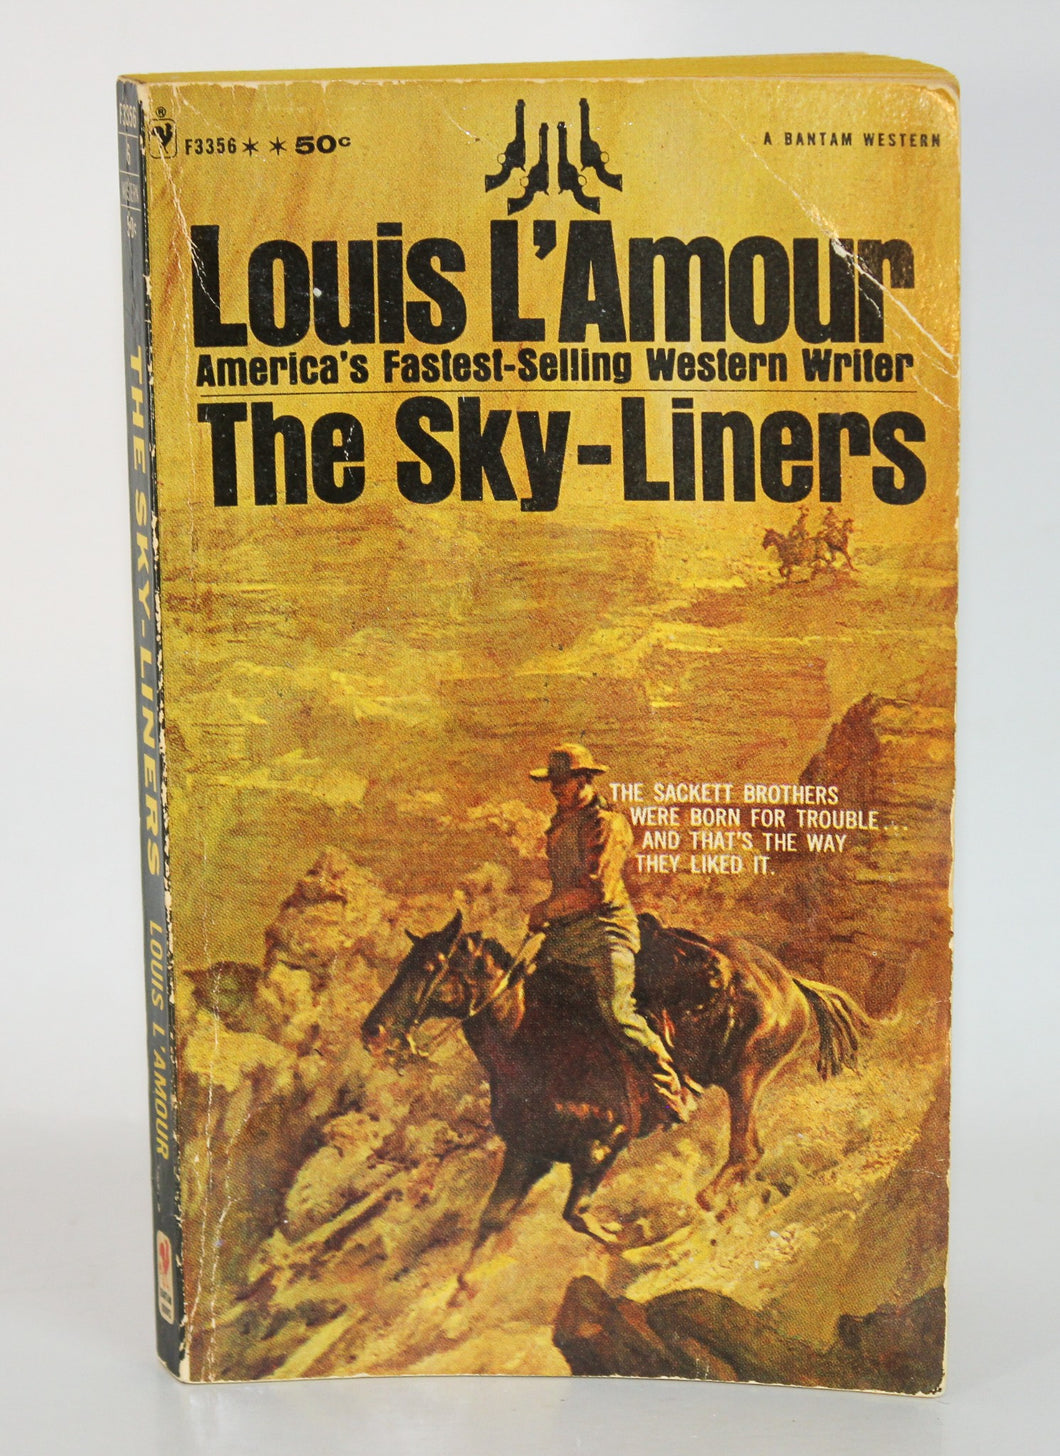 The Sky Liners by Louis L'Amour Vintage Paperback Book Bantam Western F3356 1967